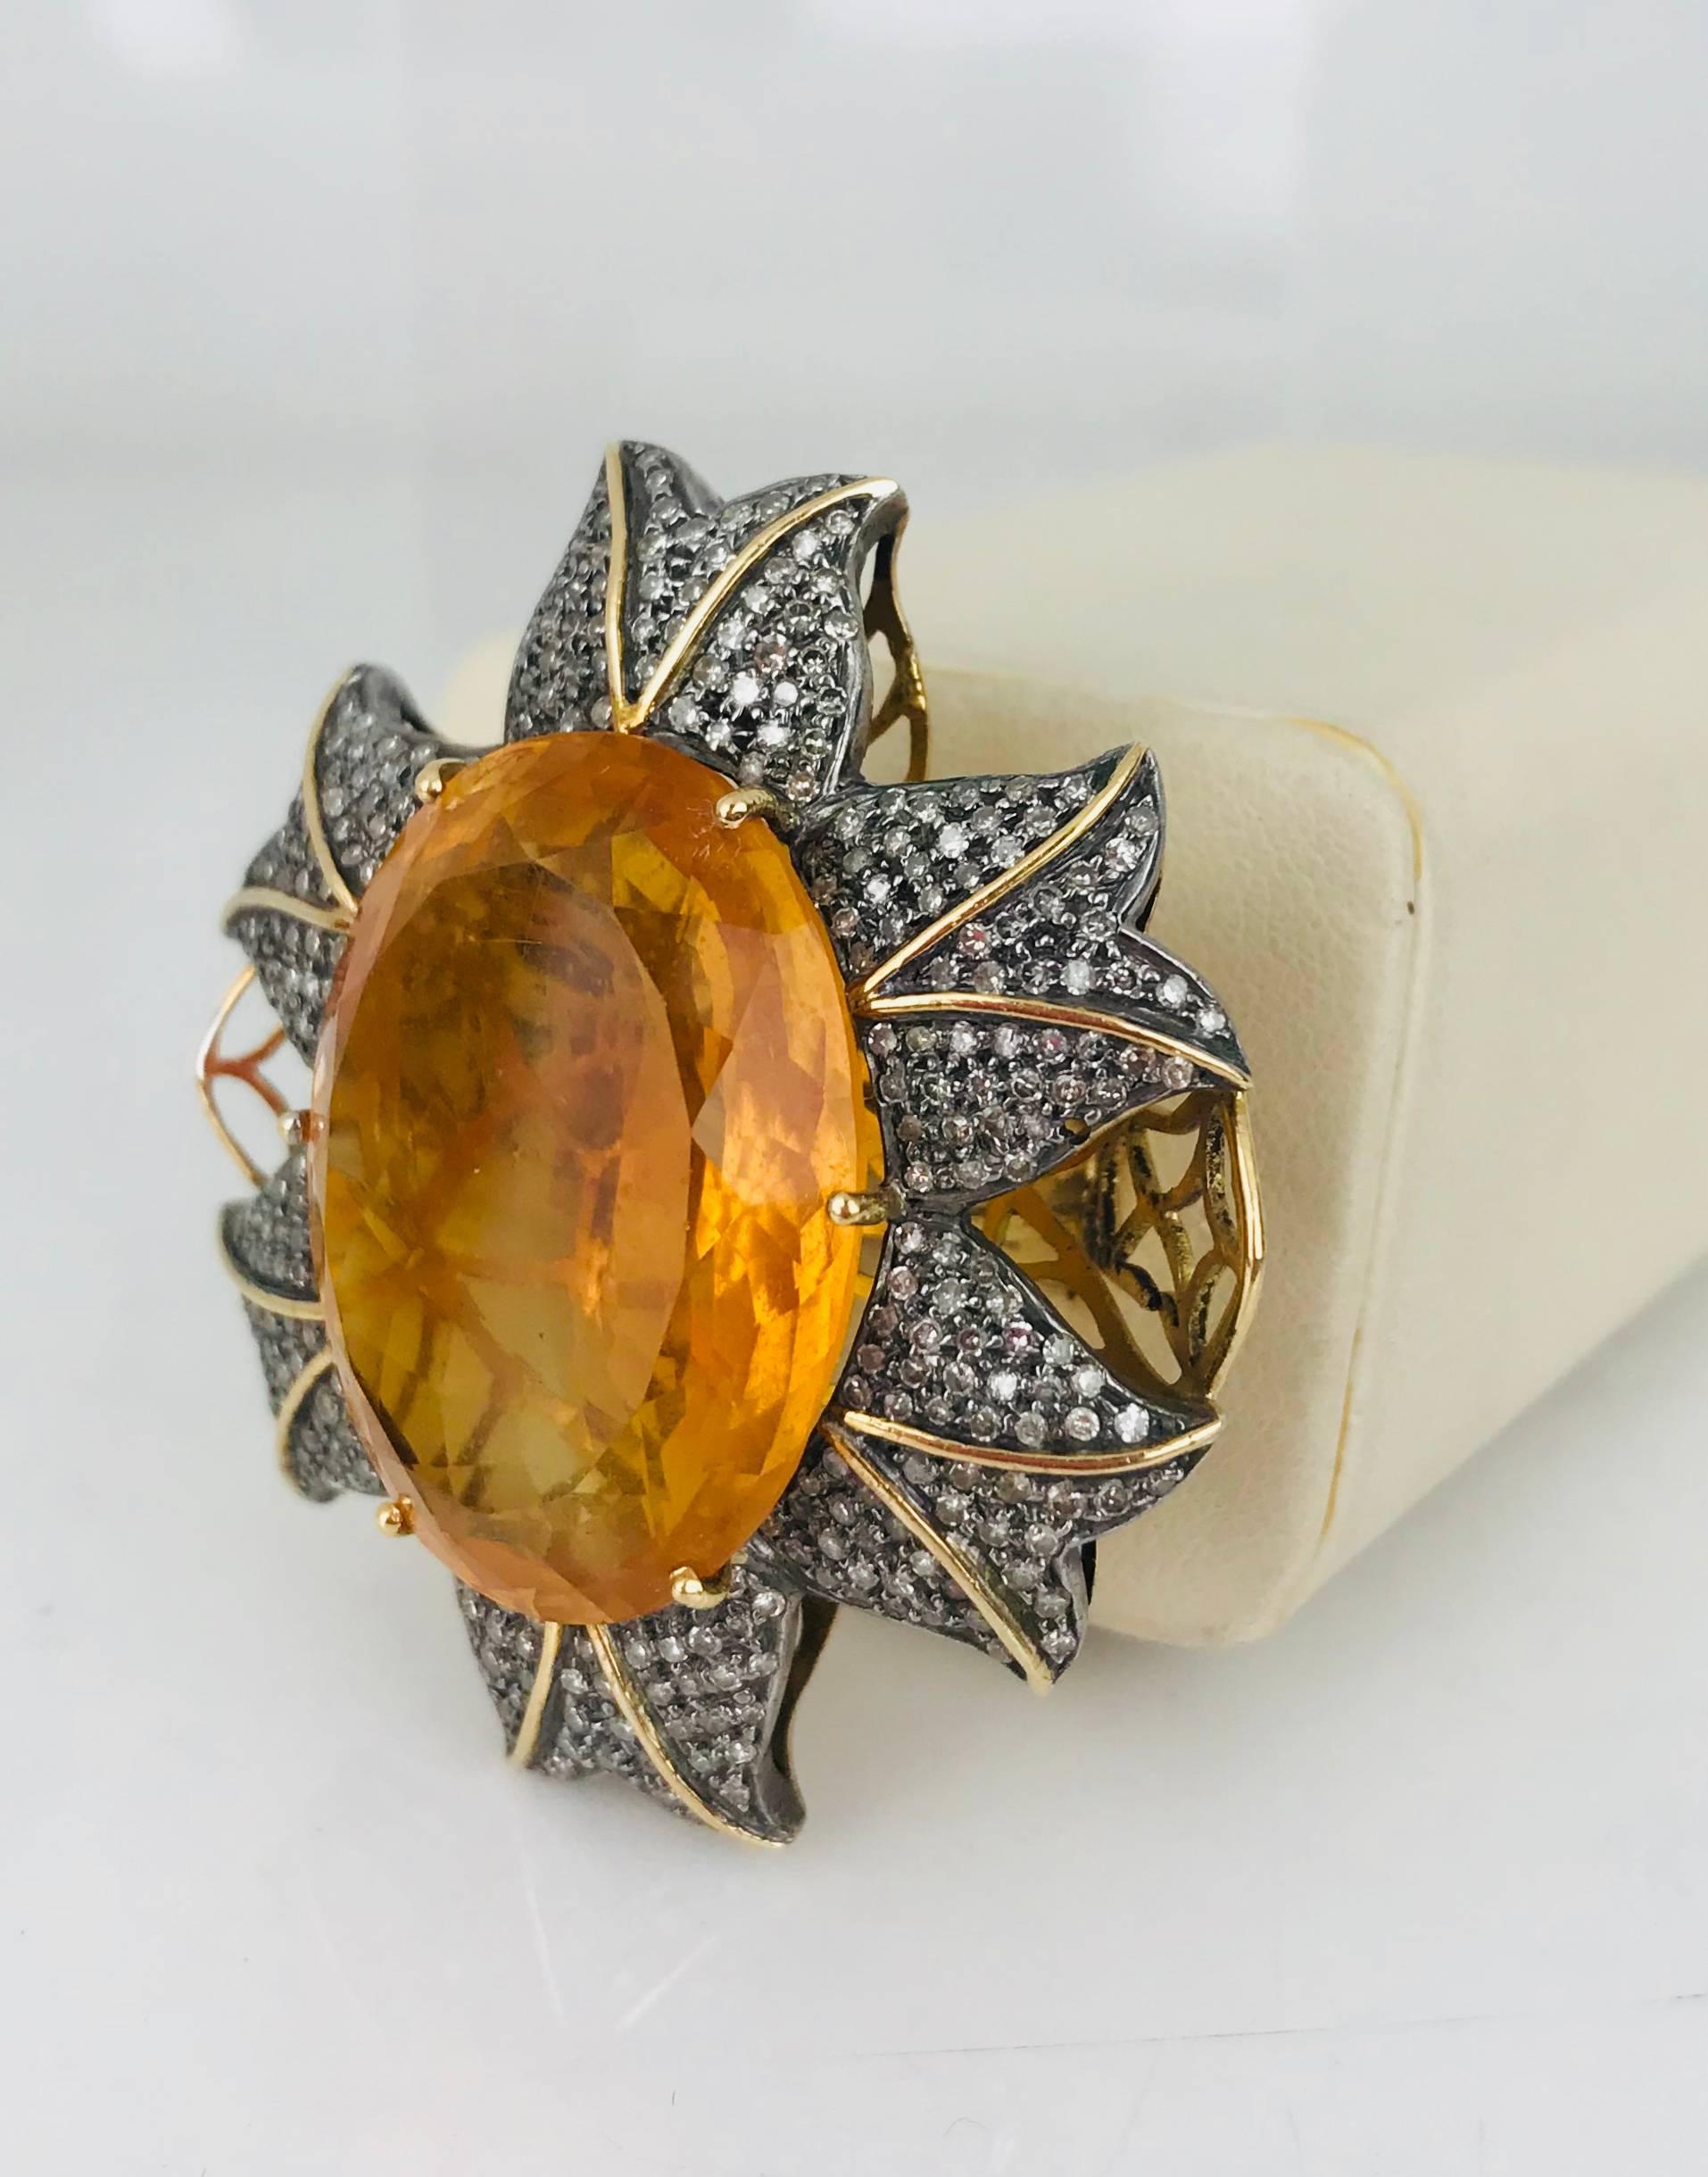 14 karat yellow gold diamond and Orange Quartz, Edwardian ring. The center is a 45 carat orange Quartz and is accented by approximately 1.50 carats of single-cut diamonds in a whimsical style, flamboyant setting. 

The large Quartz measures 26.71 x